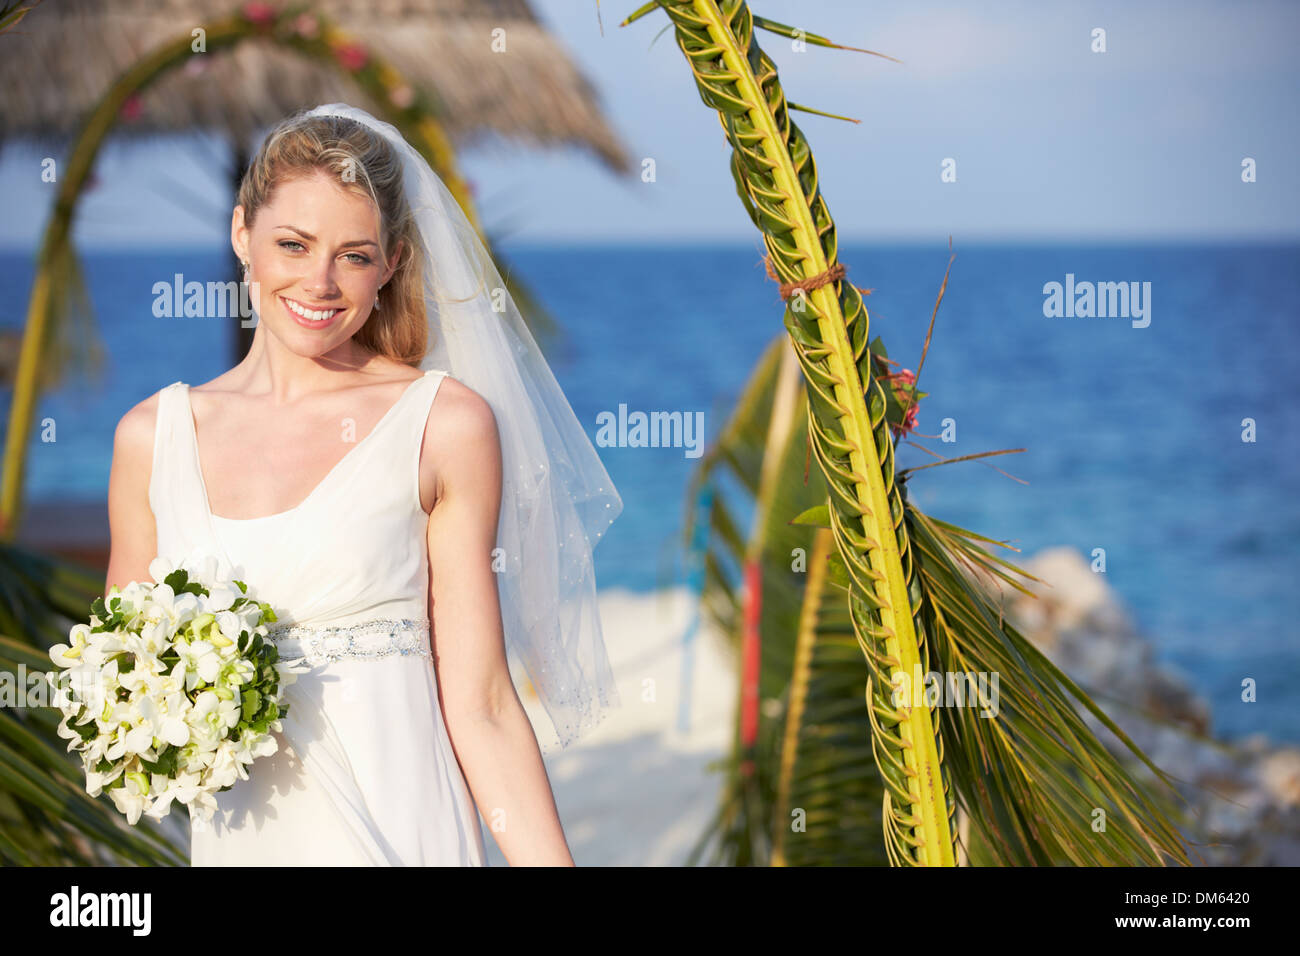 Beautiful Bride Getting Married In Beach Ceremony Stock Photo